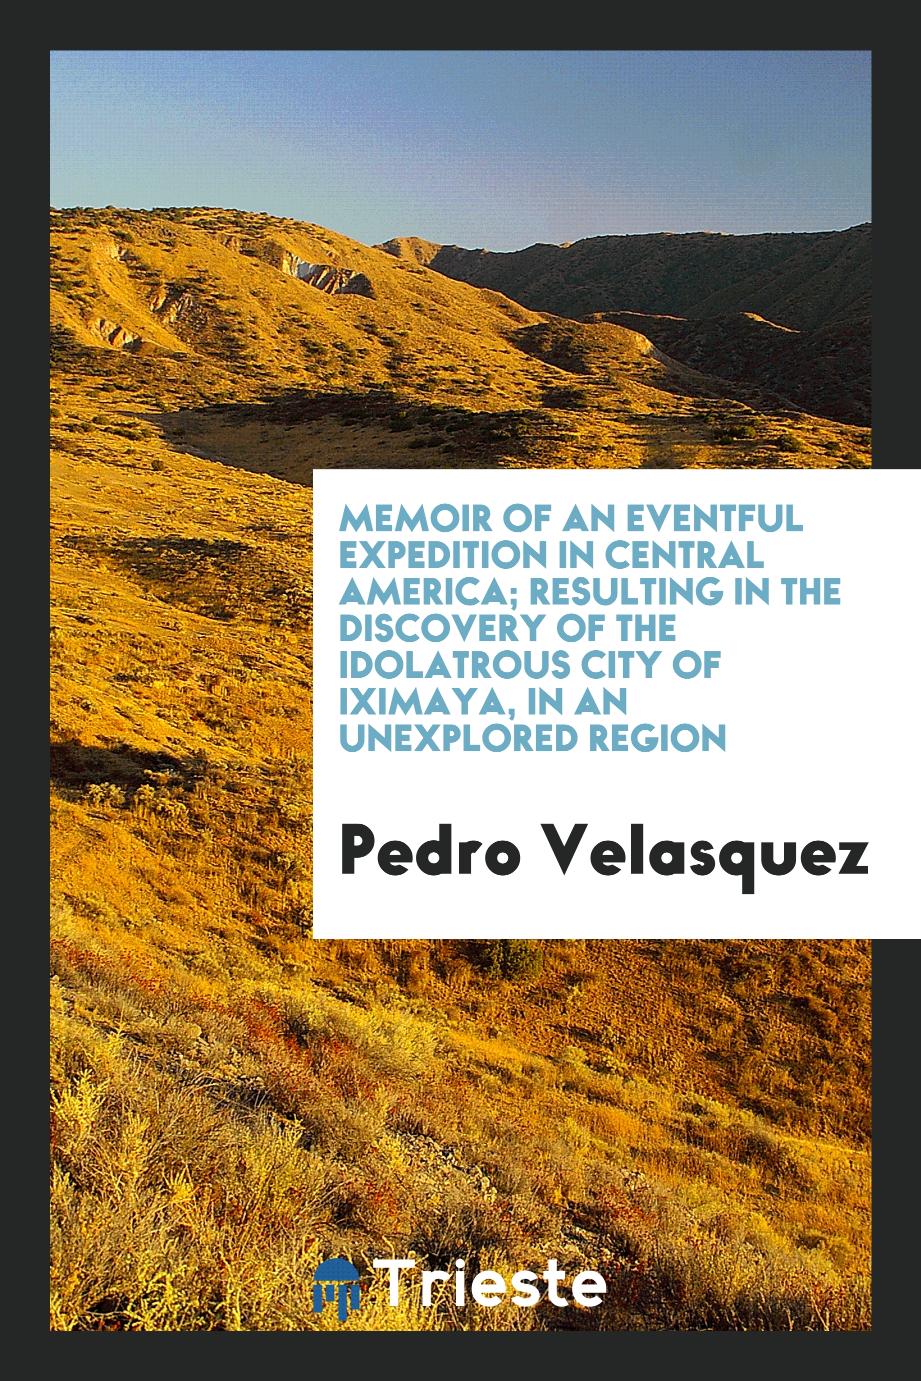 Memoir of an eventful expedition in Central America; resulting in the discovery of the idolatrous city of Iximaya, in an unexplored region